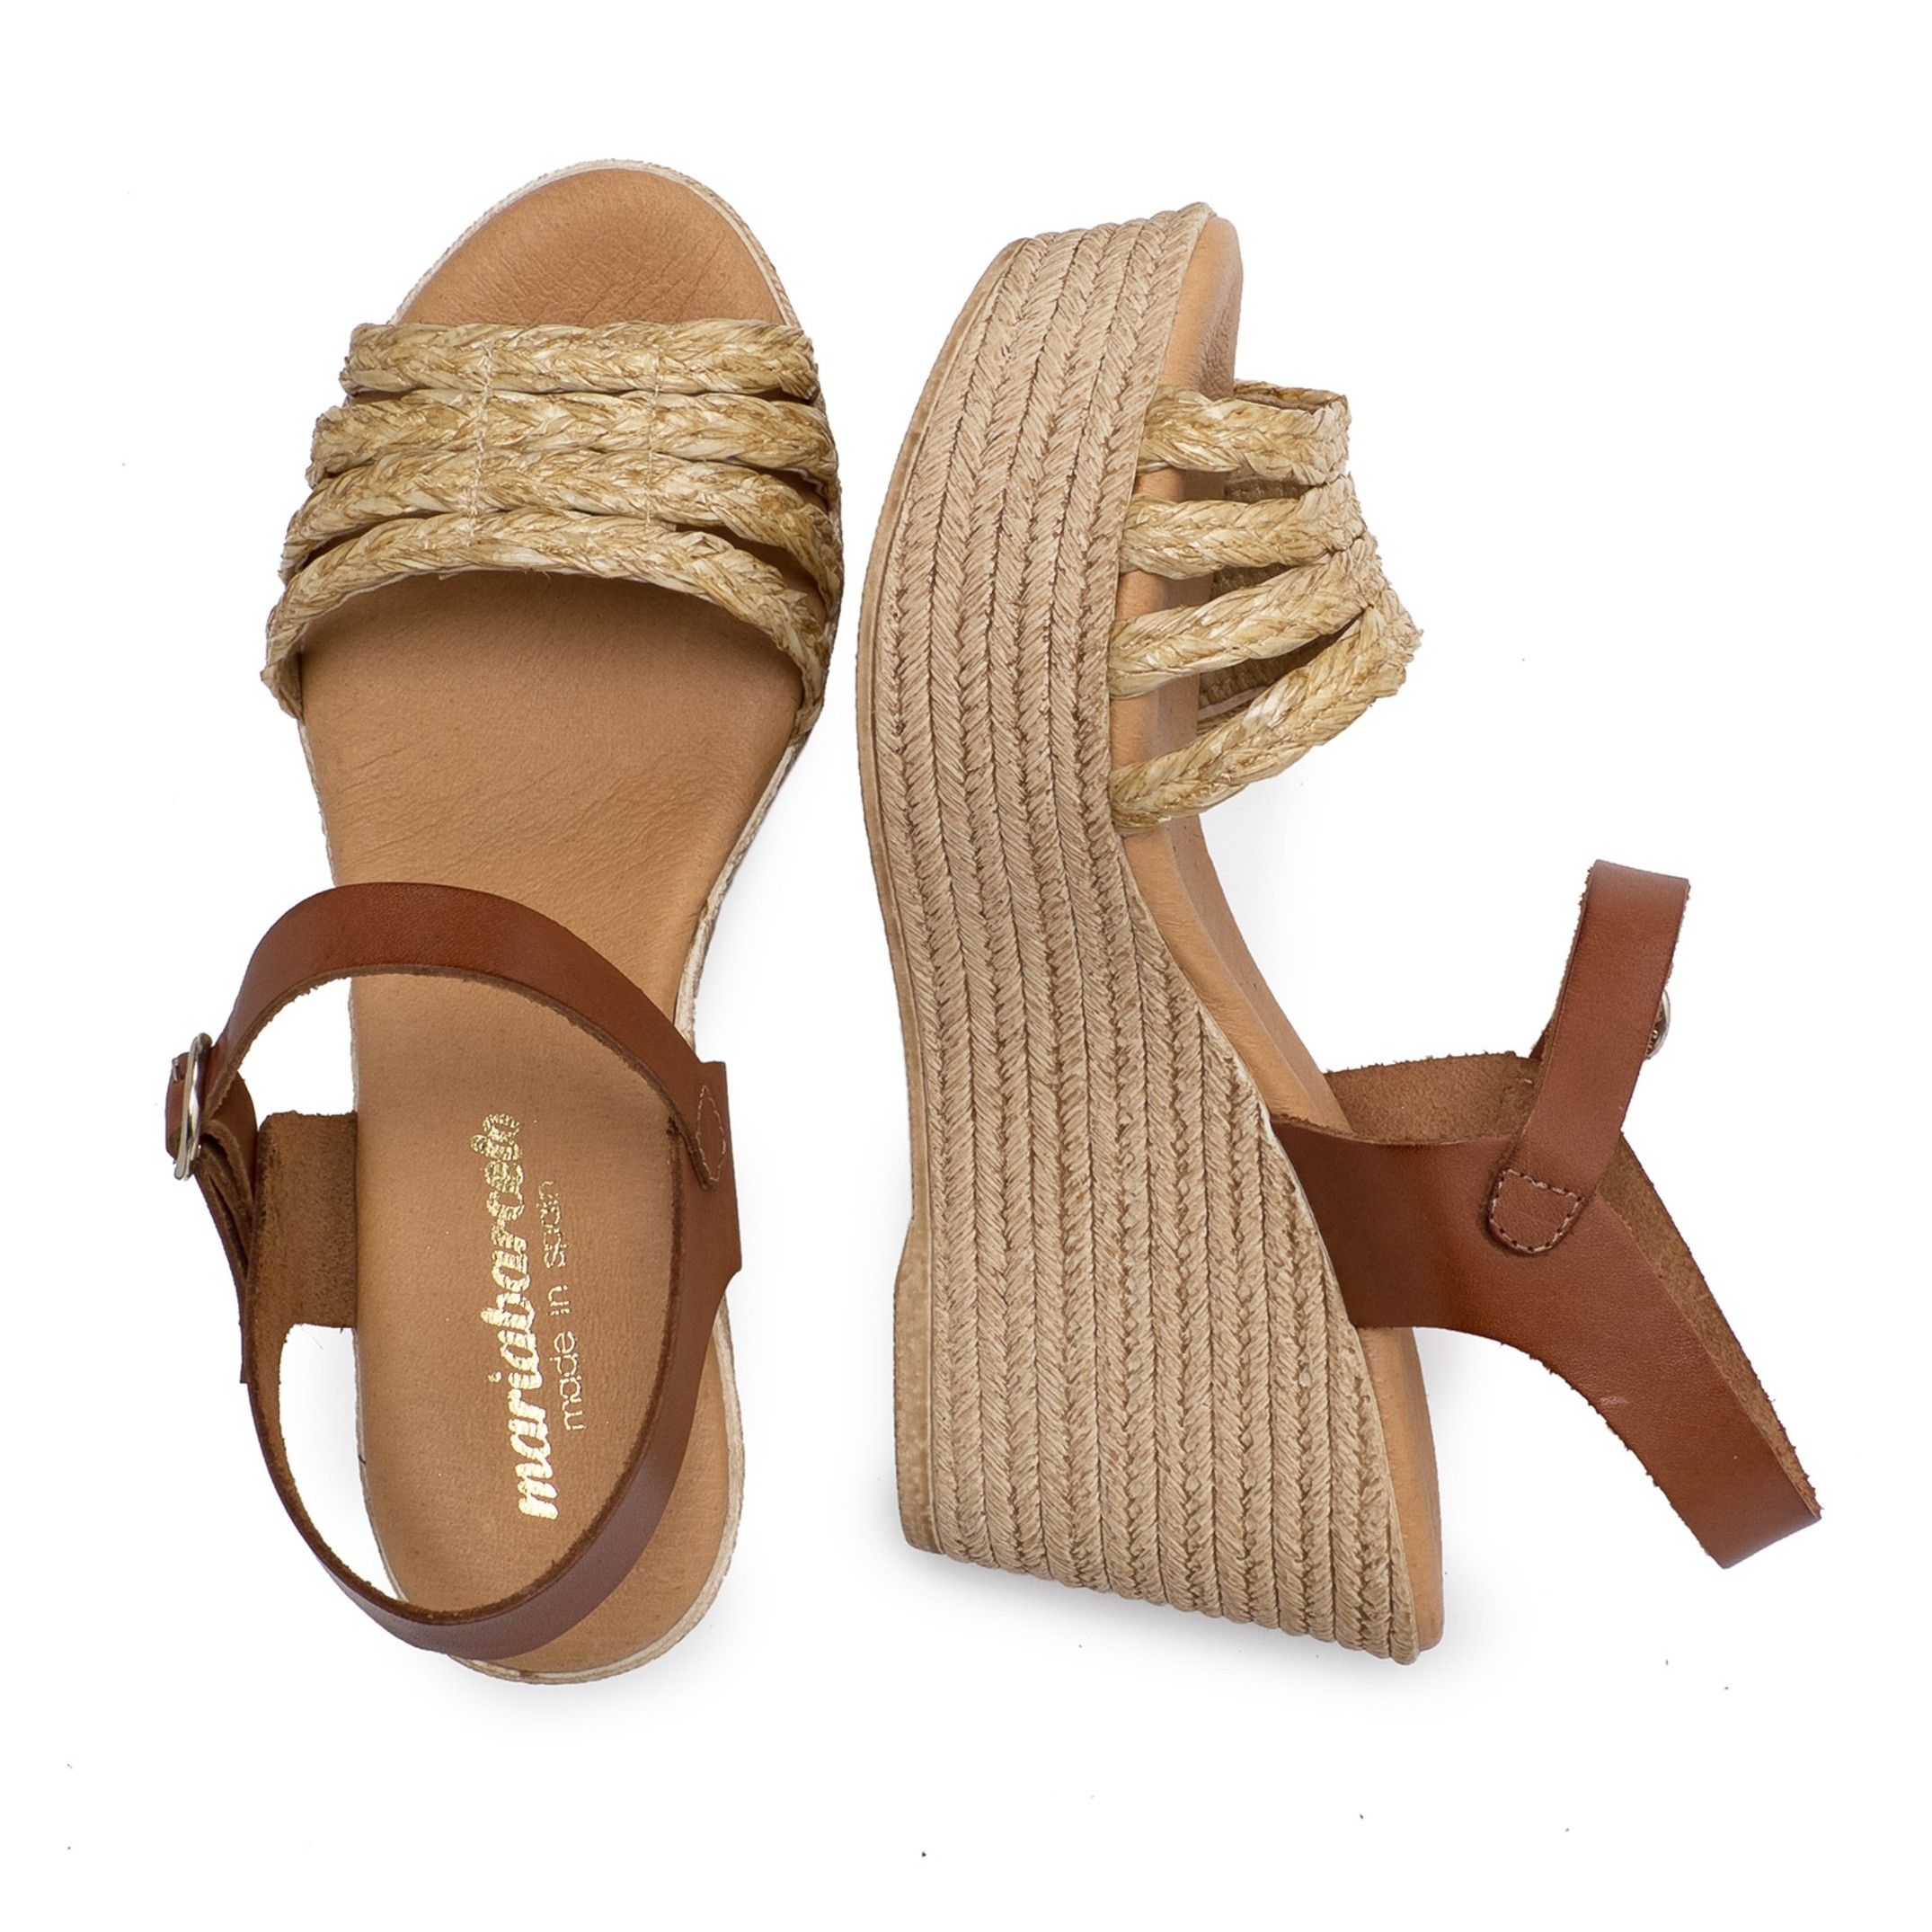 High Wedge sandals, by María Barceló Shoes. Upper: cowhide leather and textile. Closure: Metal buckle. Inner lining and insole: pig lining. Padded sole: 0,5 cm. Sole material: 100%, lightweight and non-slip. Heel height: 8'5 cm. Platform 3 cm. Designed and manufactured in Spain.